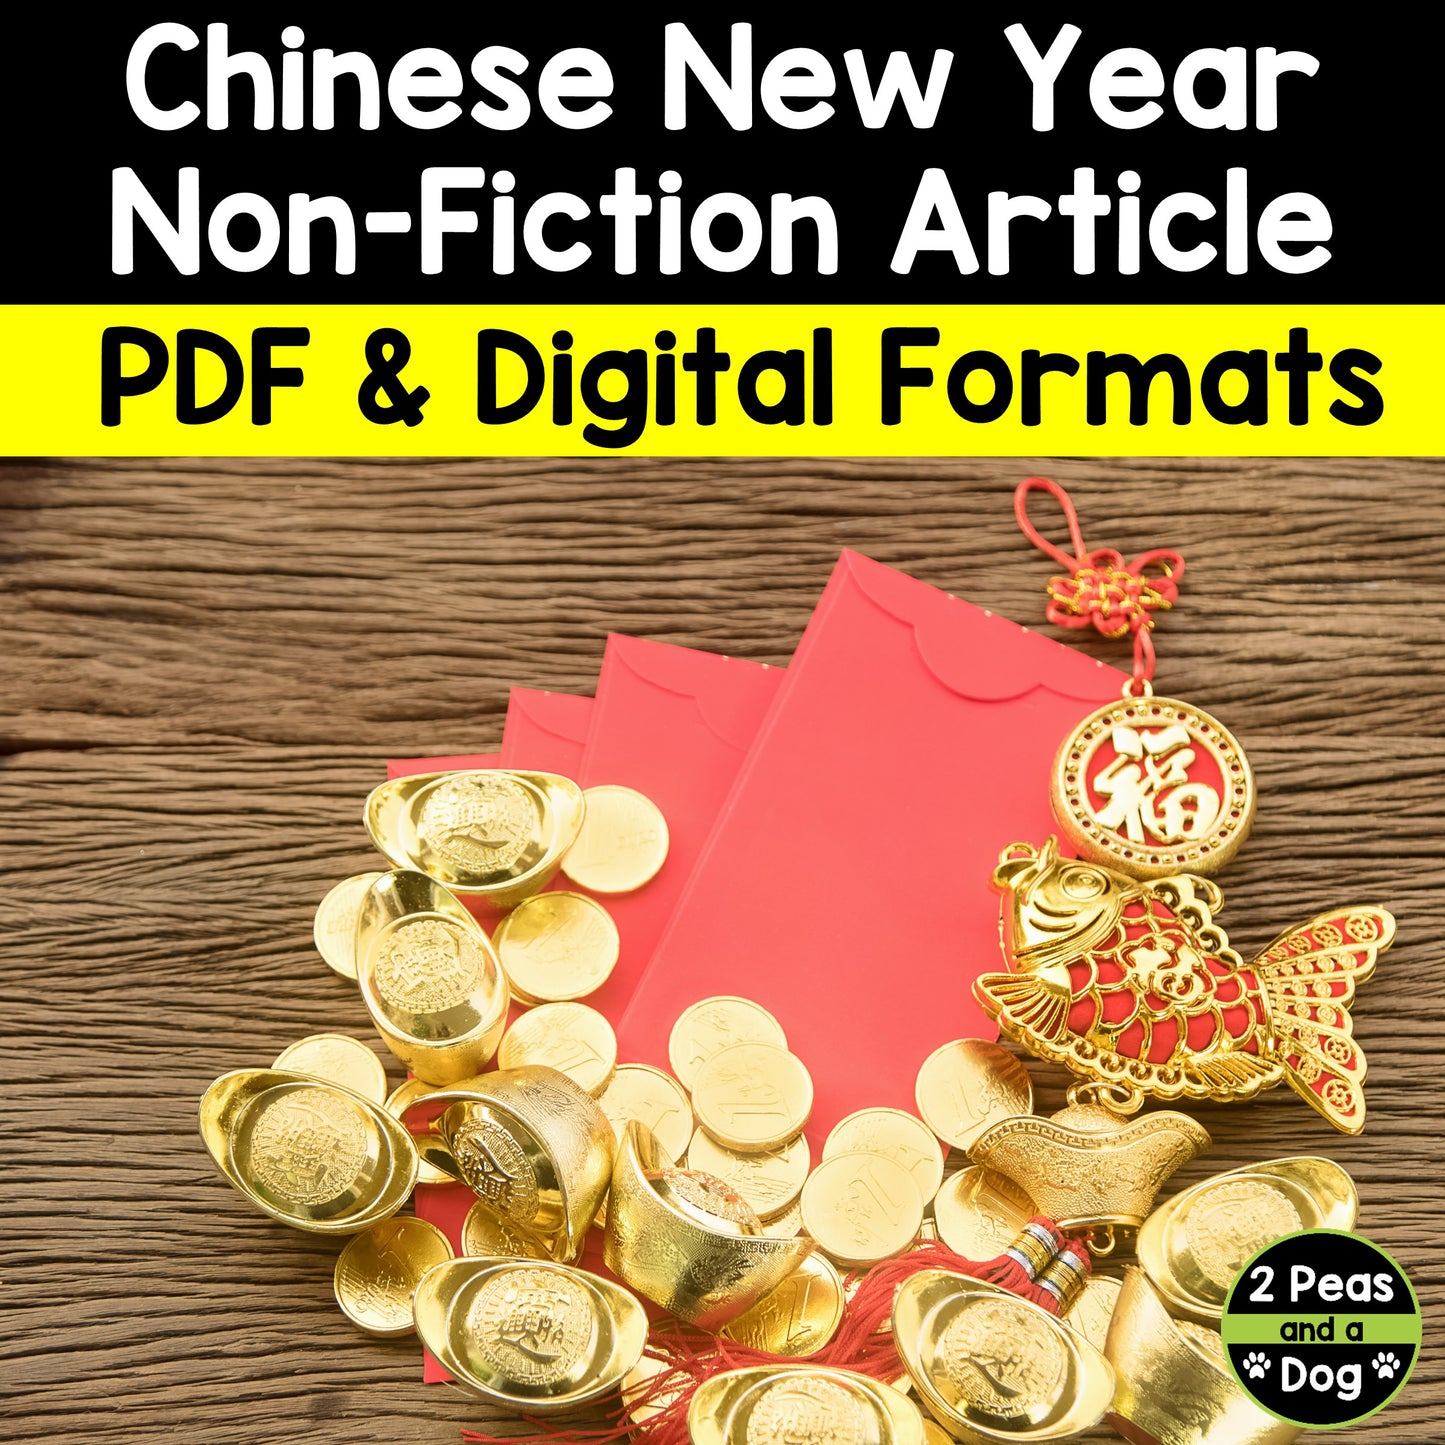 Chinese New Year Non-Fiction Article